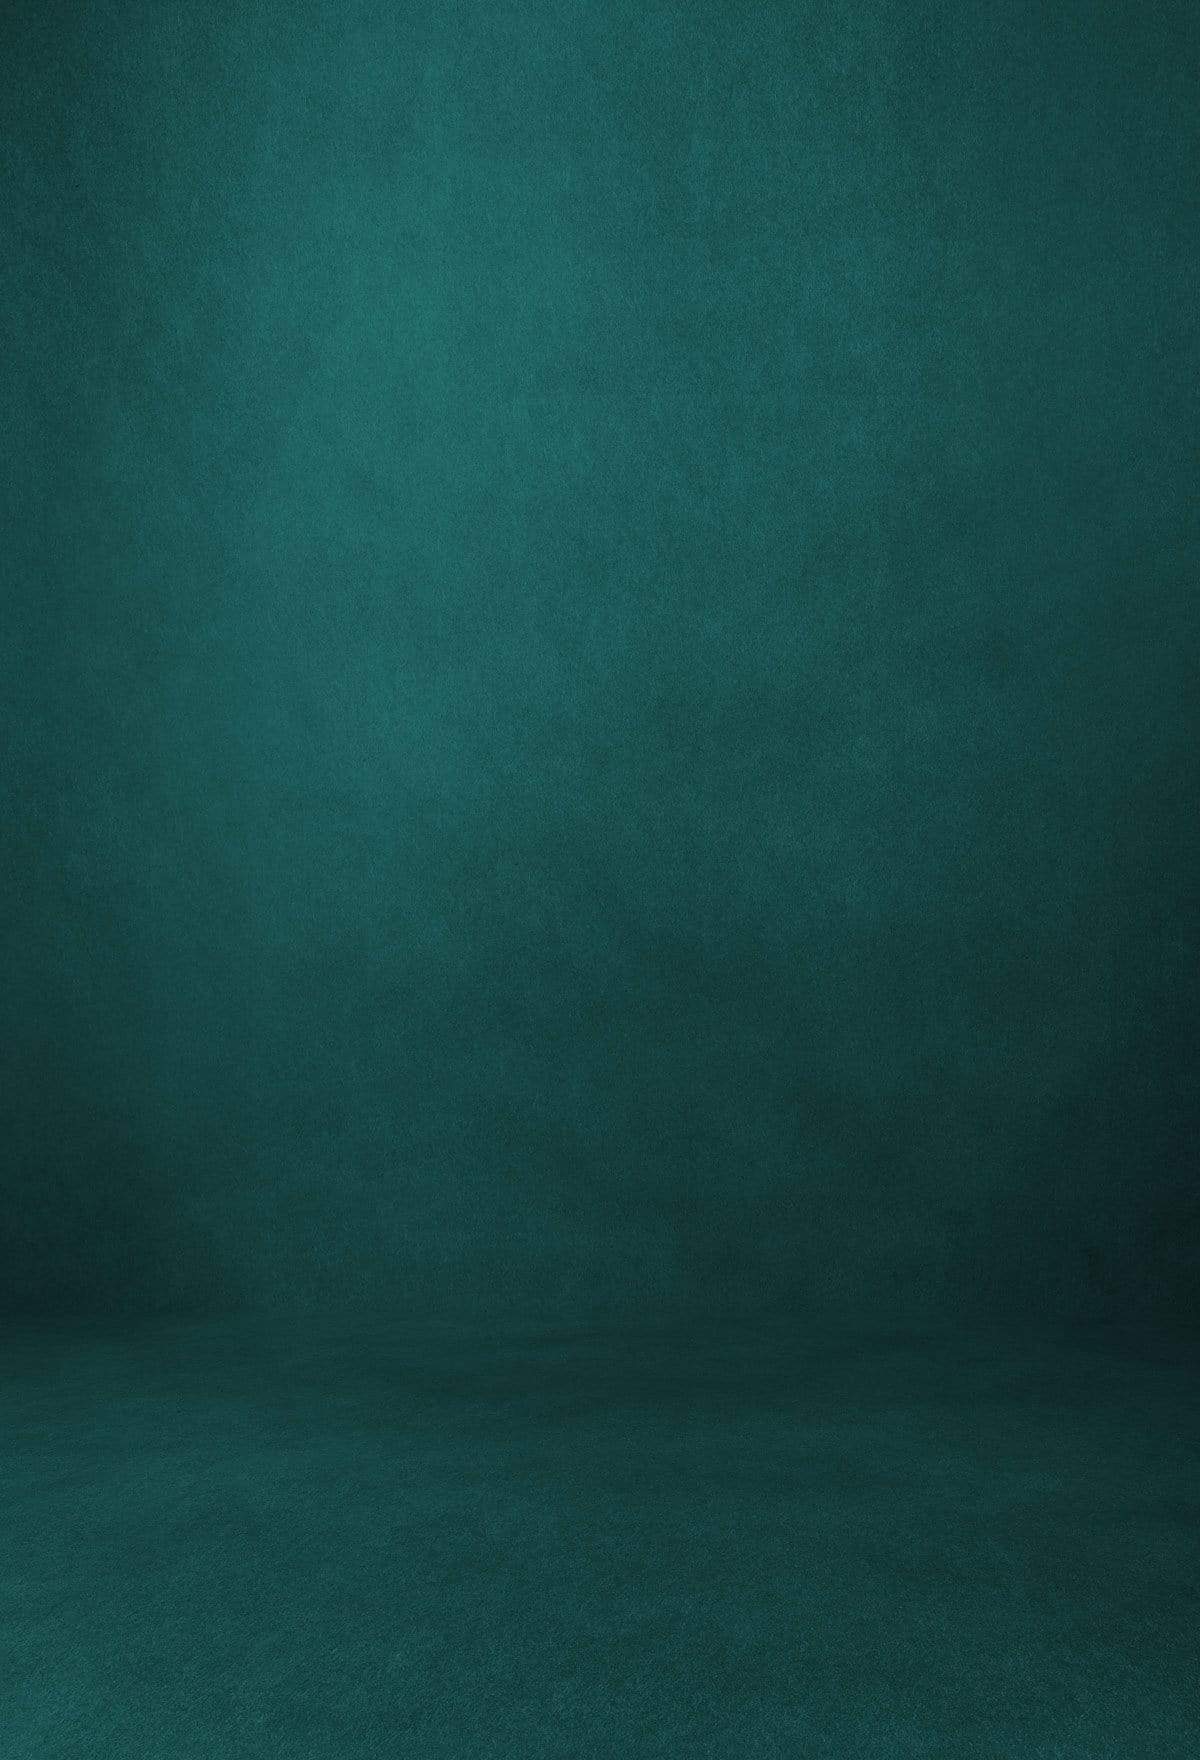 Katebackdrop£ºKate Turquoise Abstract Texture Backdrop for Photography